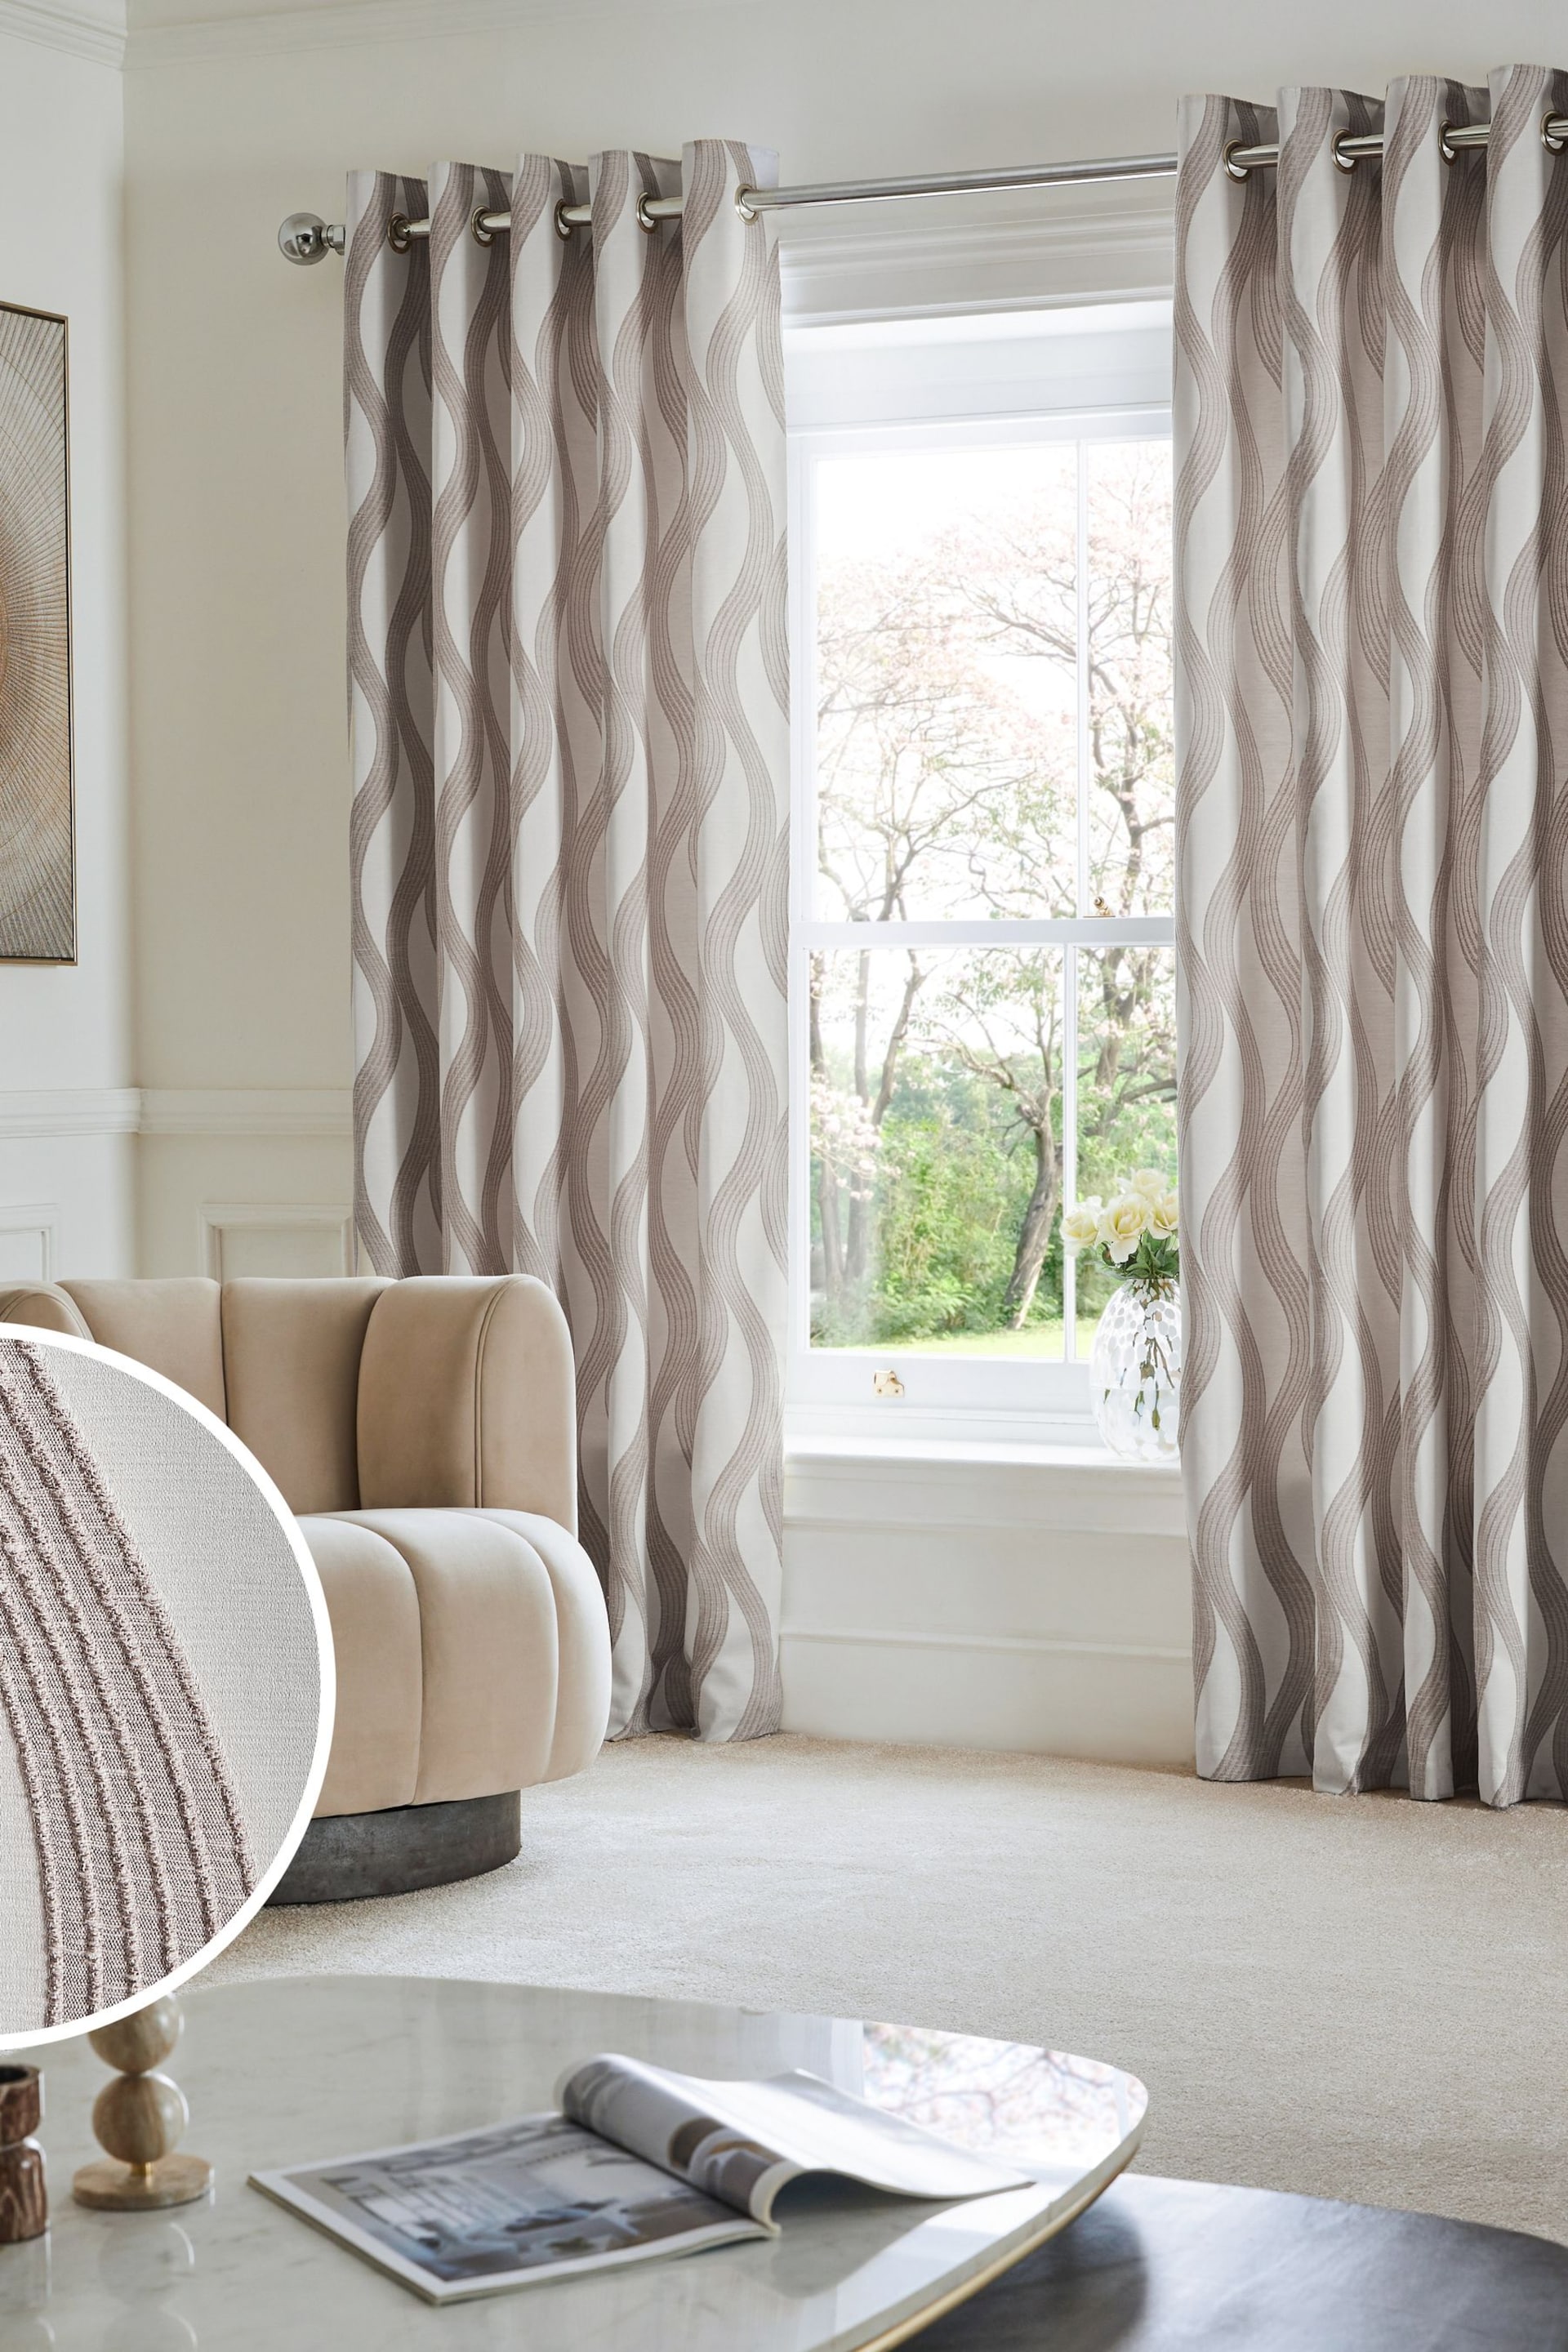 Natural Jacquard Swirl Eyelet Lined Curtains - Image 1 of 5